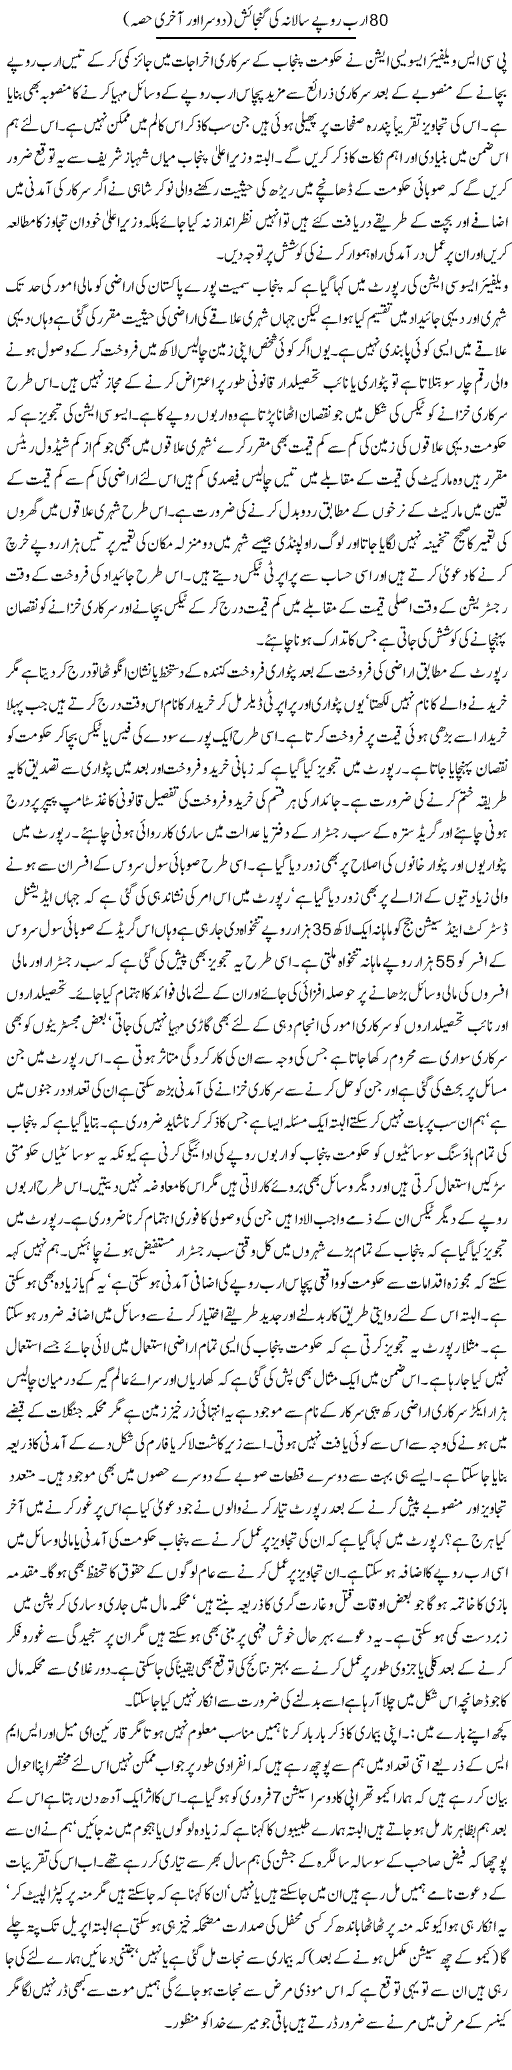 Collecting 80 Billion Yearly Express Column Hameed Akhtar 11 Feb 2011